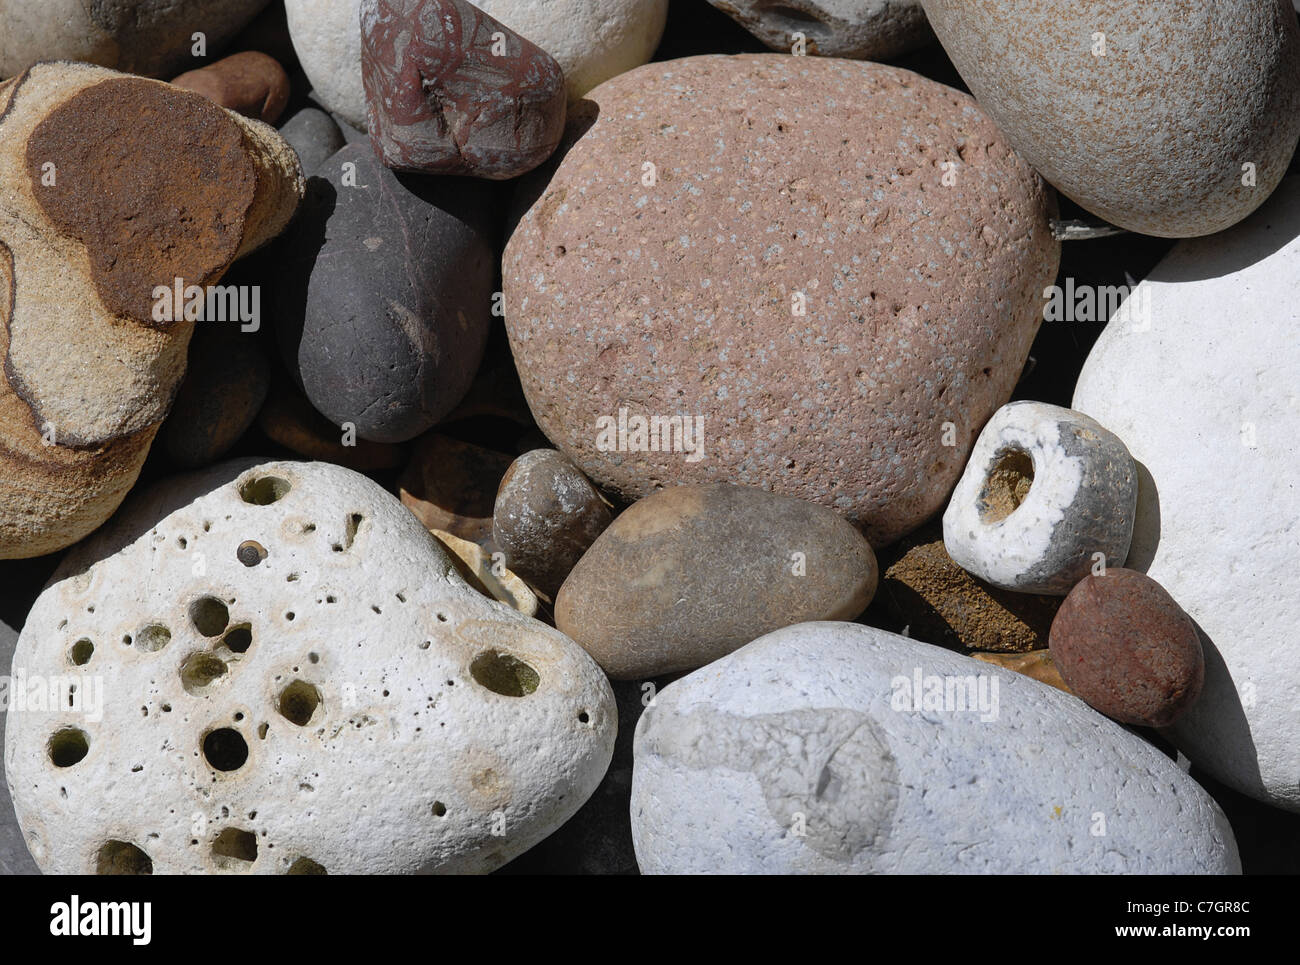 Group of various pebbles and stones taken in warm sunlight. Stock Photo